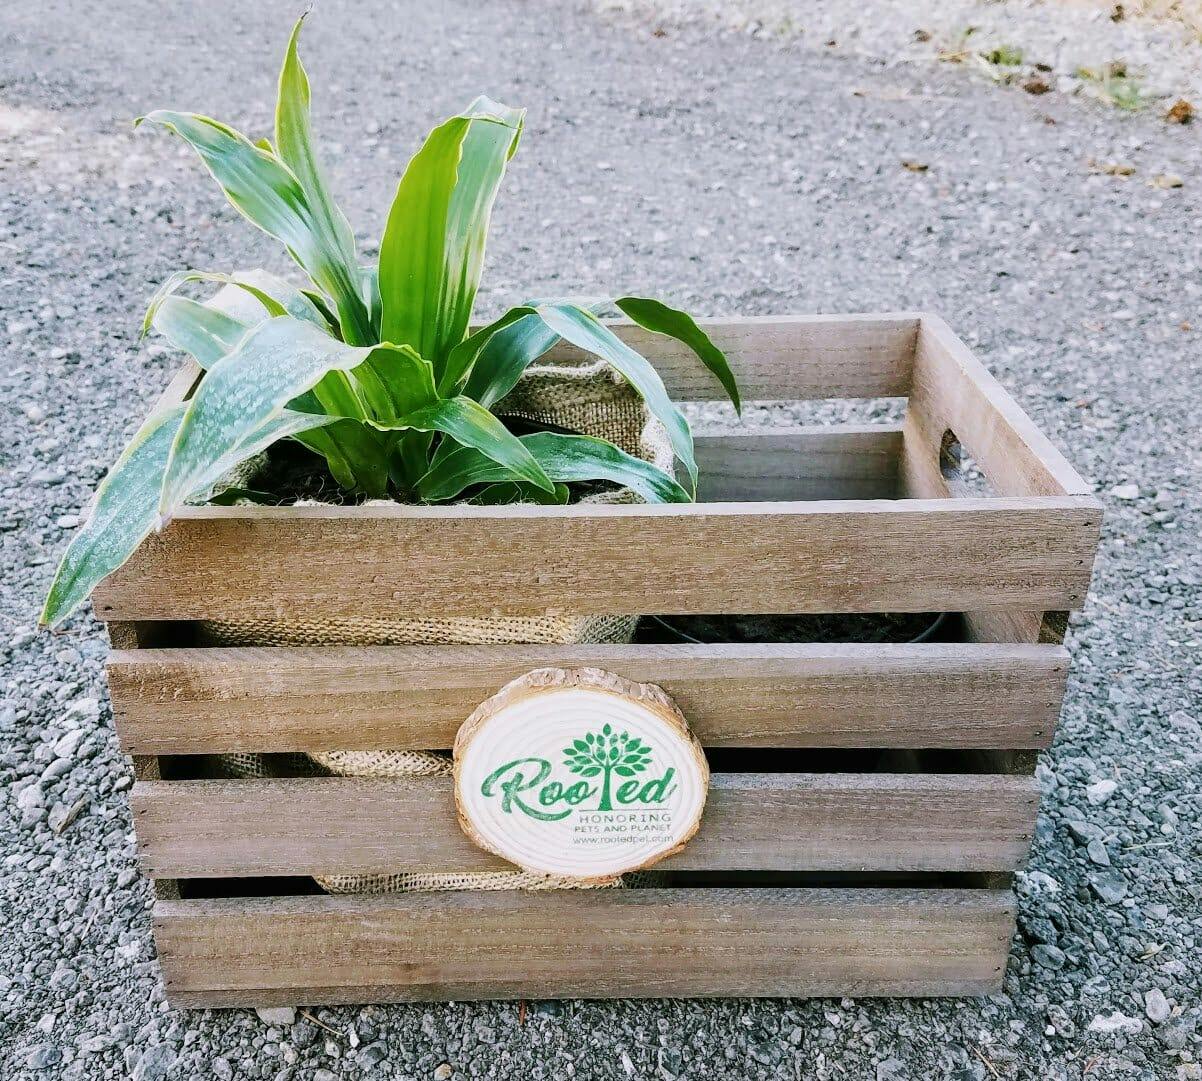 Rooted pet crate